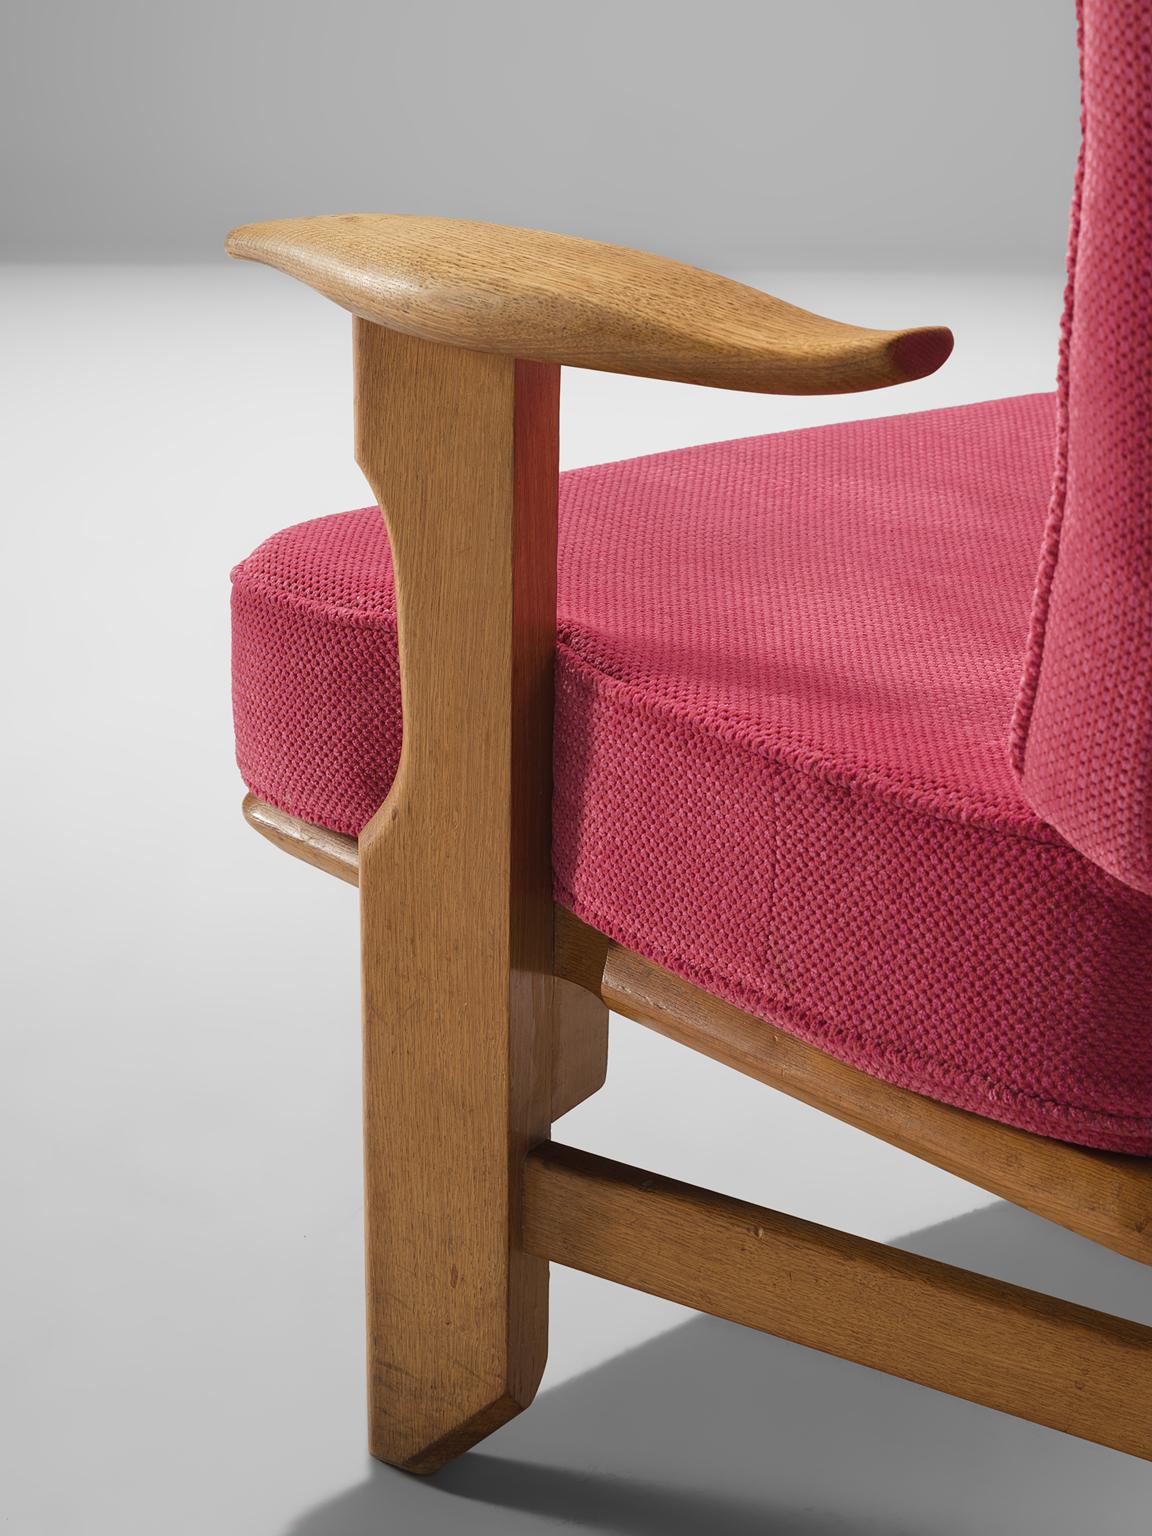 Fabric Guillerme et Chambron Pair of Solid Oak Armchairs in Pink Upholstery